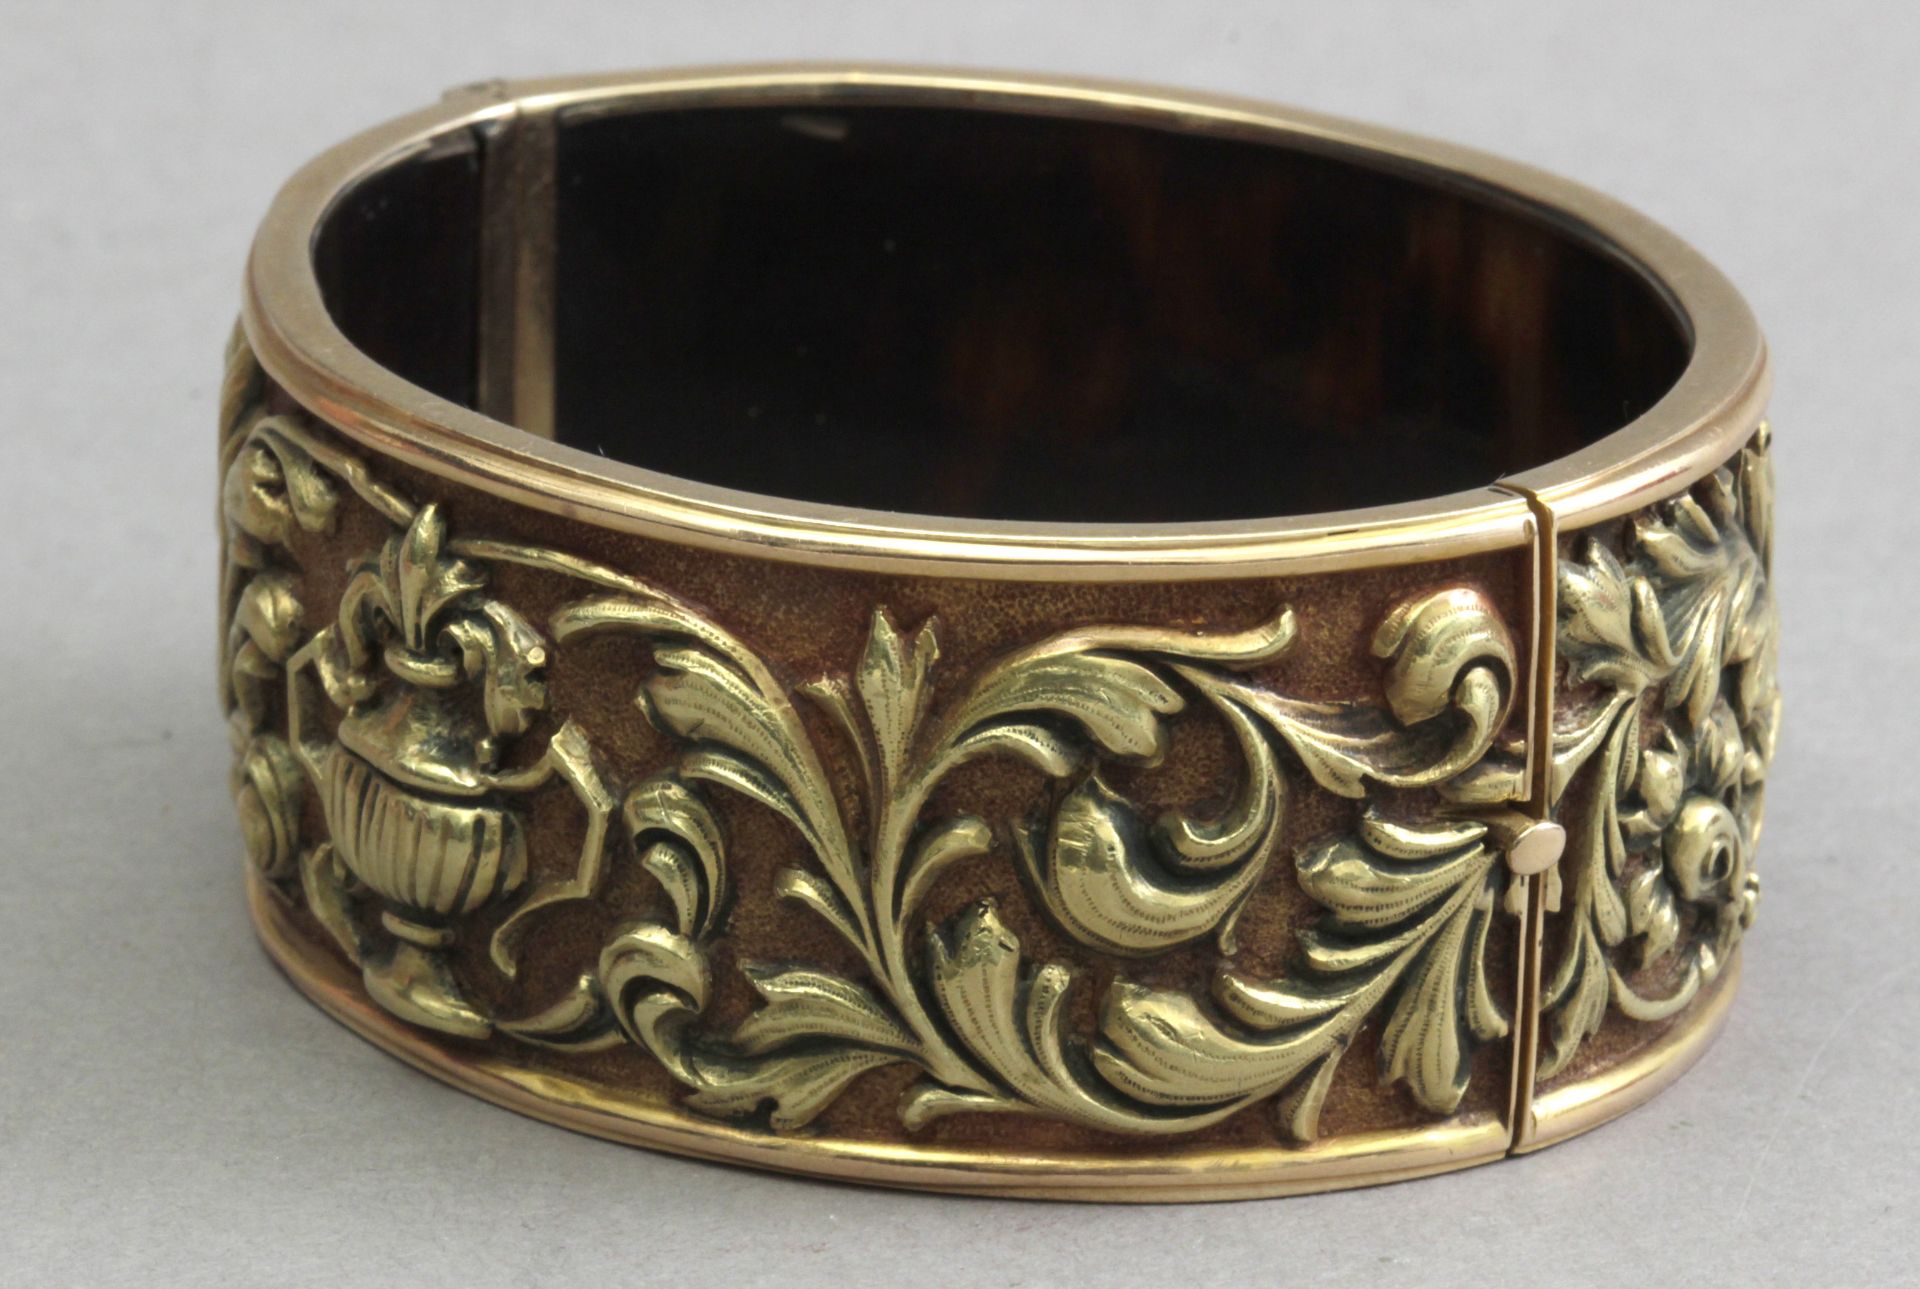 Possibly Fuset I Grau. A late 19th century bangle in 18k. yellow gold and tortoiseshell - Bild 2 aus 8